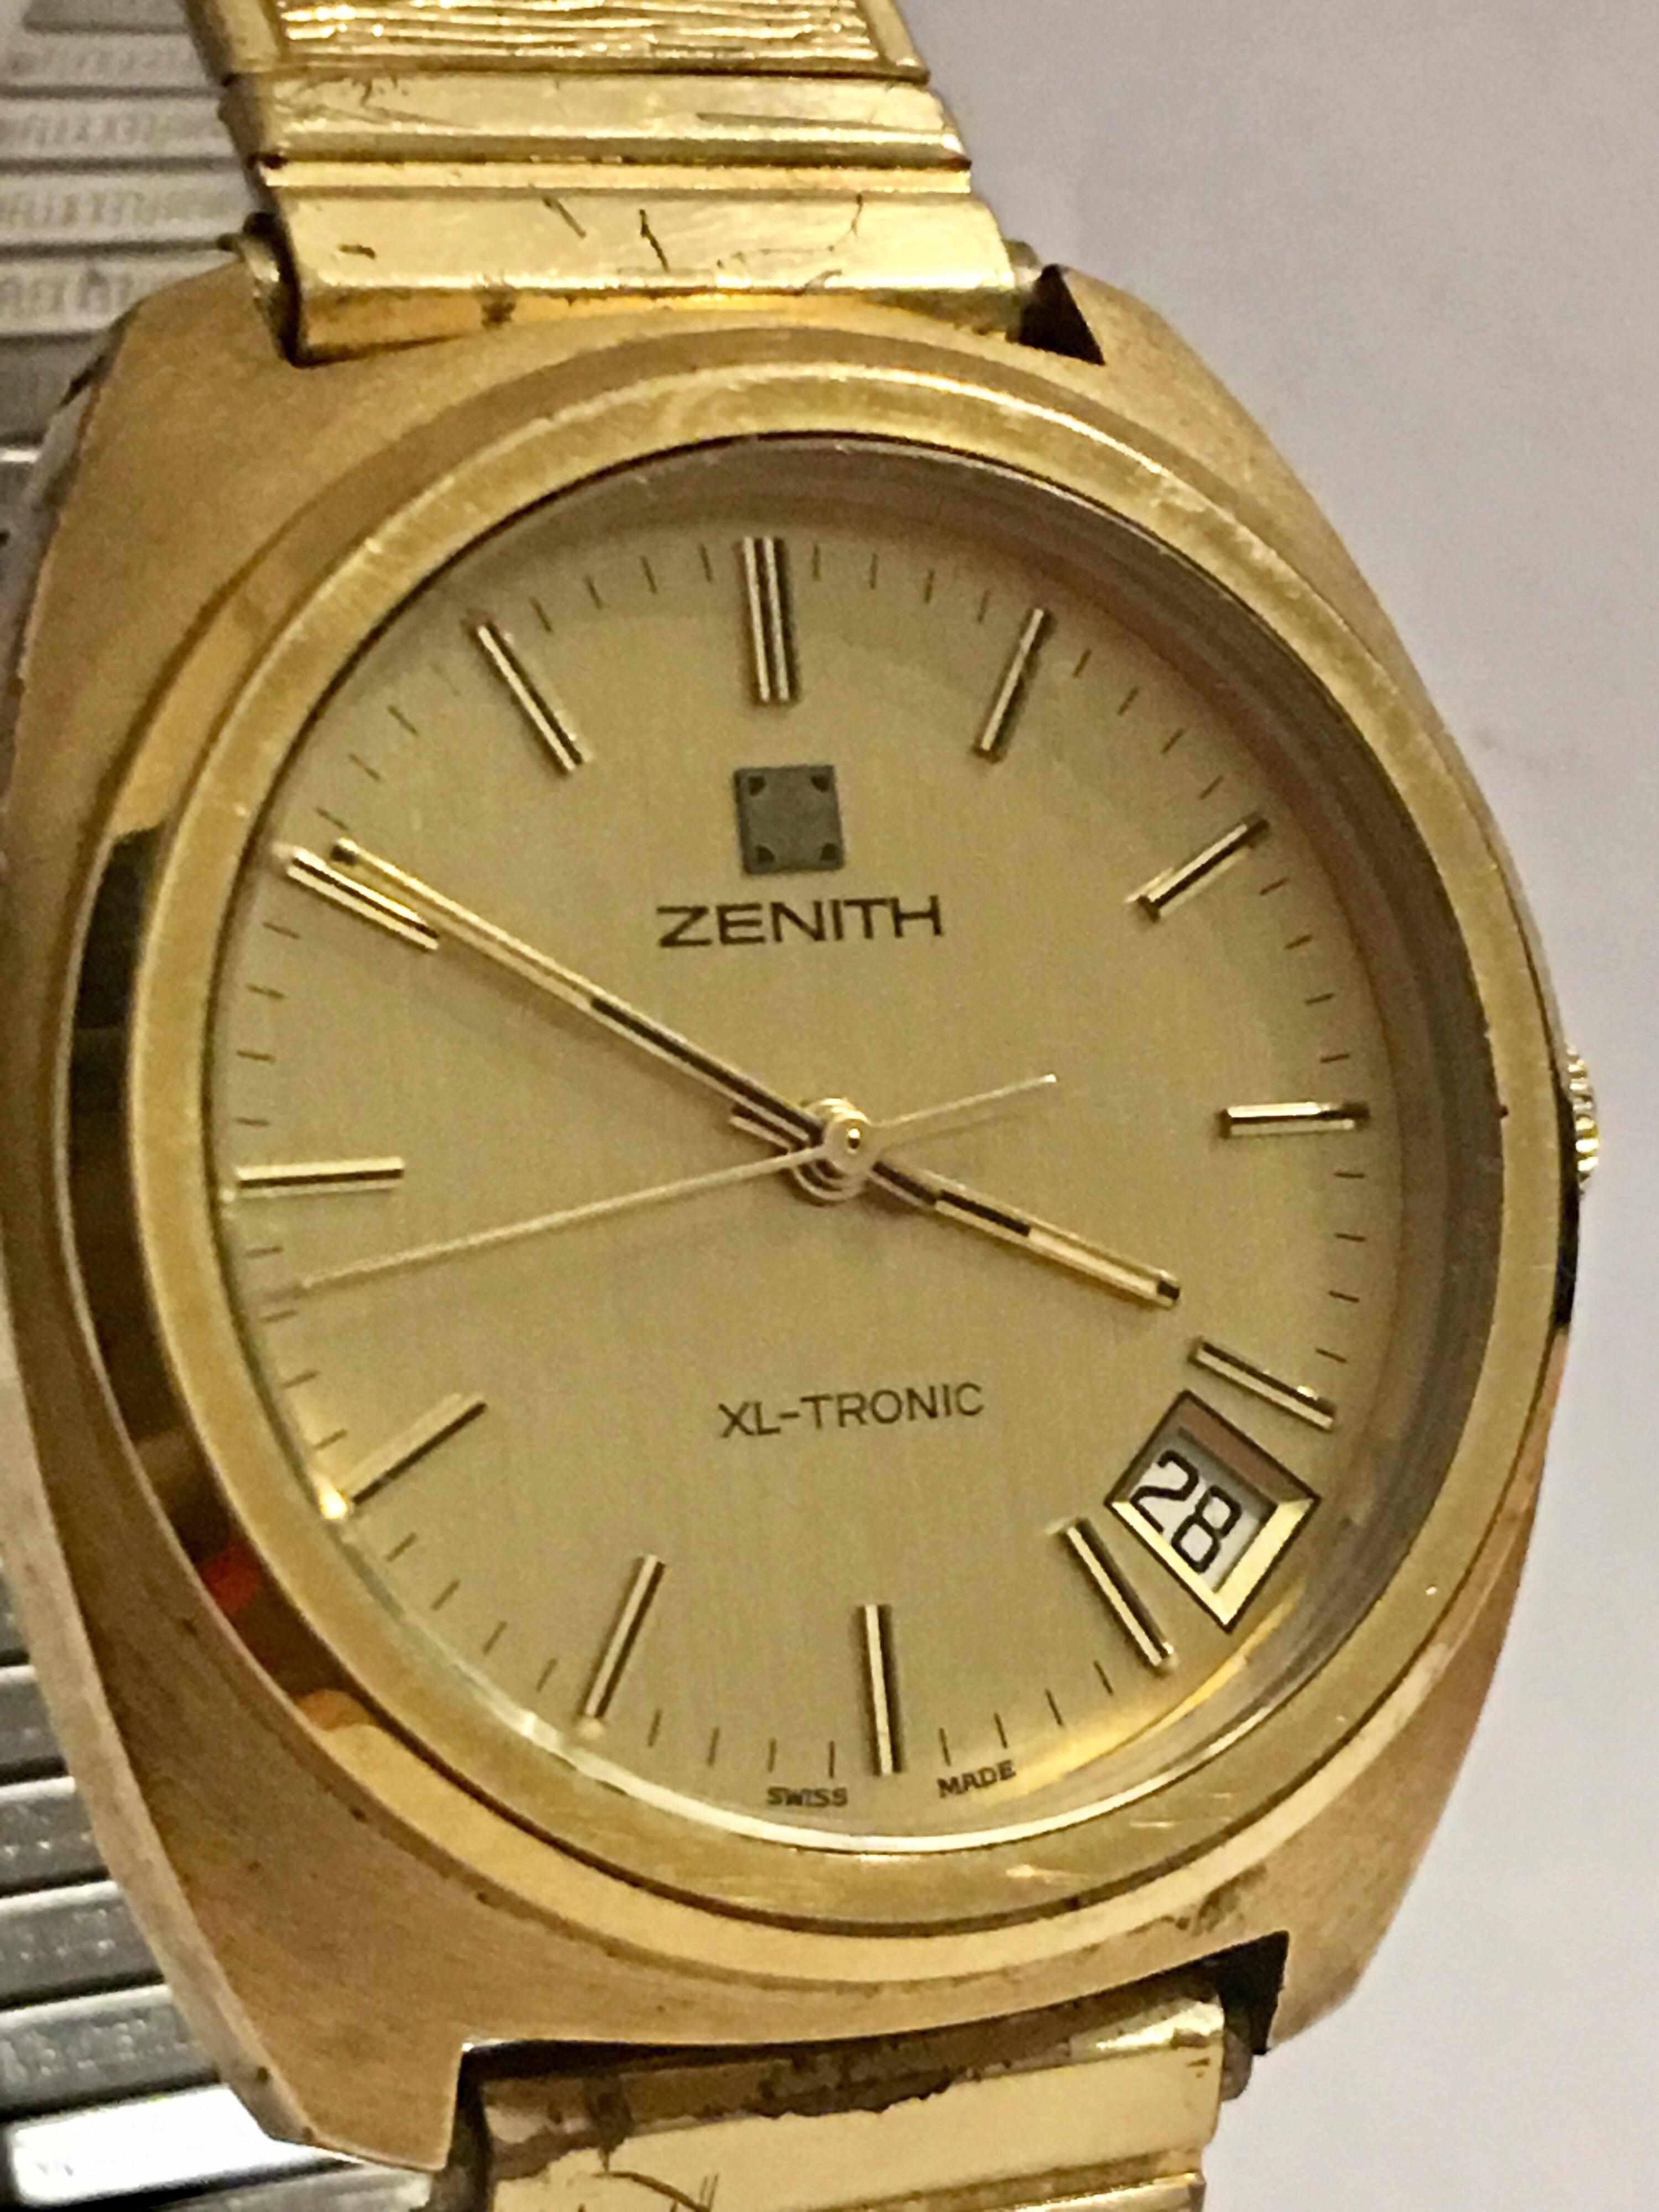 This Vintage Gold Plated/ Stainless Steel back watch is working and running well with its swift seconds battery operated. Some visible scratches and worn on the Bessel and strap as shown. Please study the images carefully as form part of the